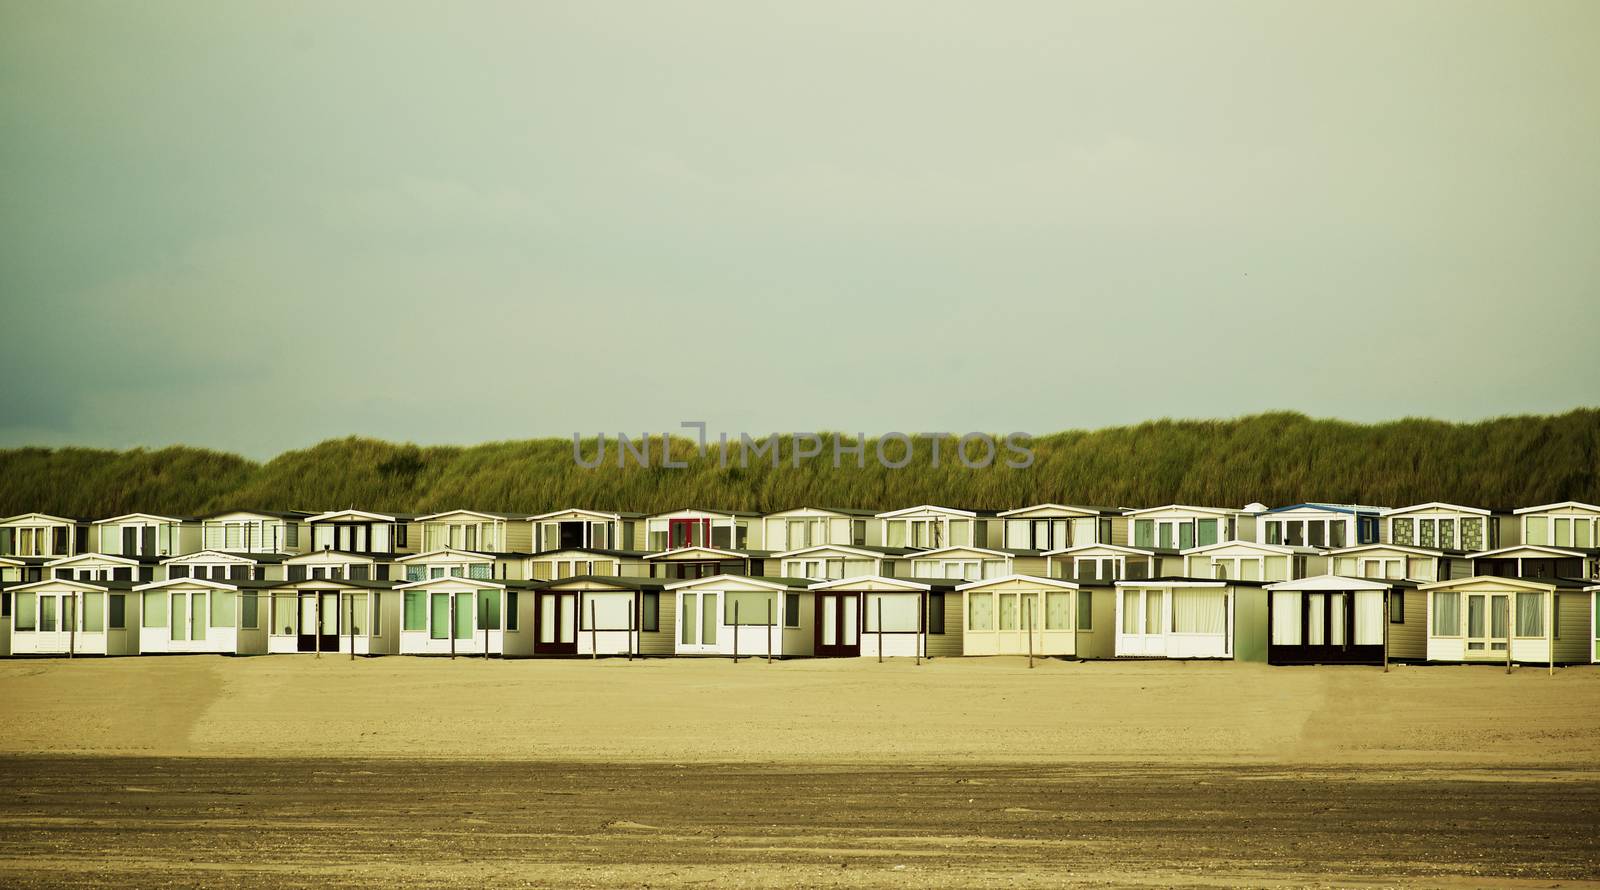 Beach Houses on North Sea coast in Netherlands Outdoors. Retro Styled